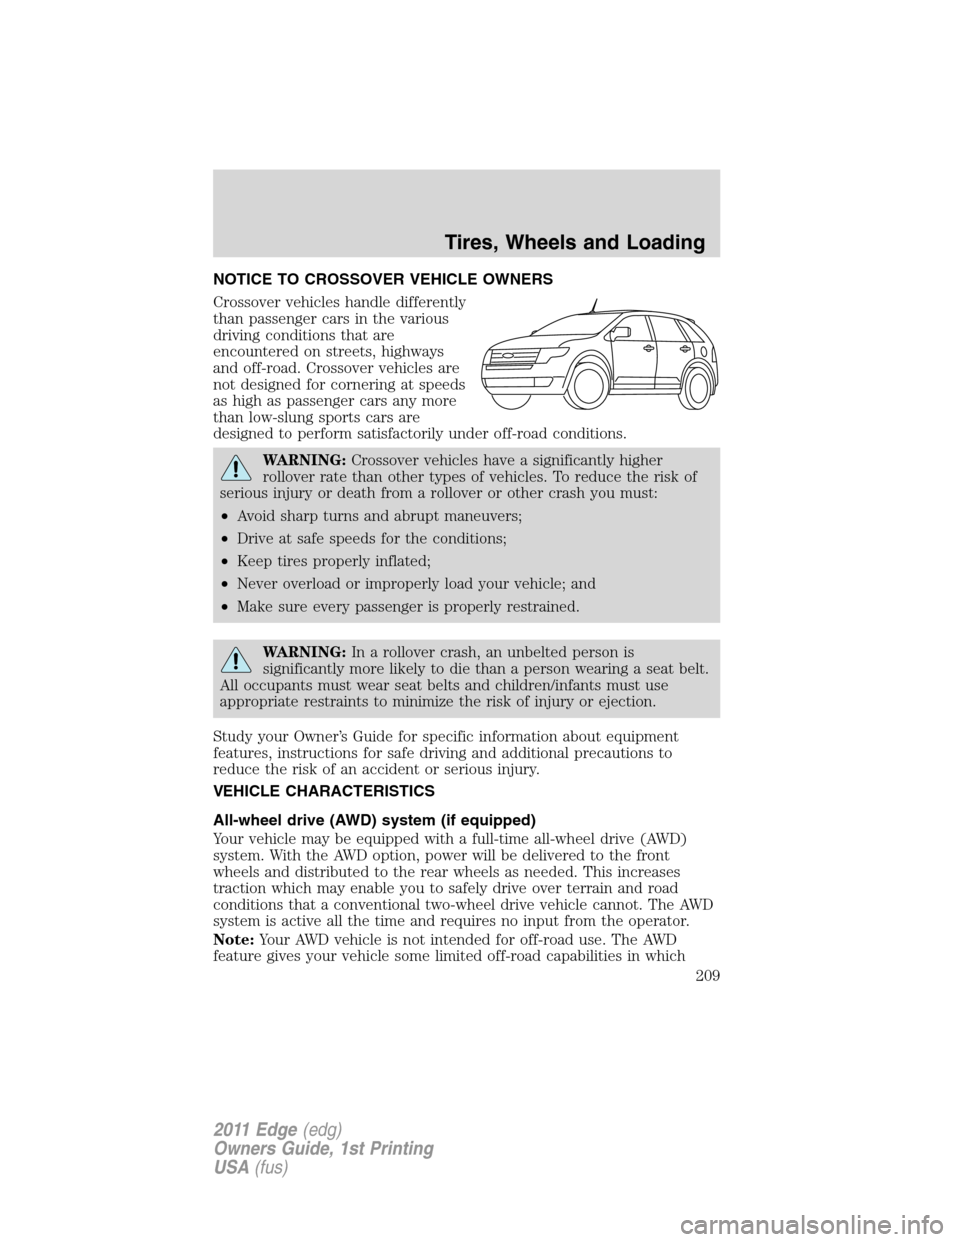 FORD EDGE 2011 1.G Owners Manual NOTICE TO CROSSOVER VEHICLE OWNERS
Crossover vehicles handle differently
than passenger cars in the various
driving conditions that are
encountered on streets, highways
and off-road. Crossover vehicle